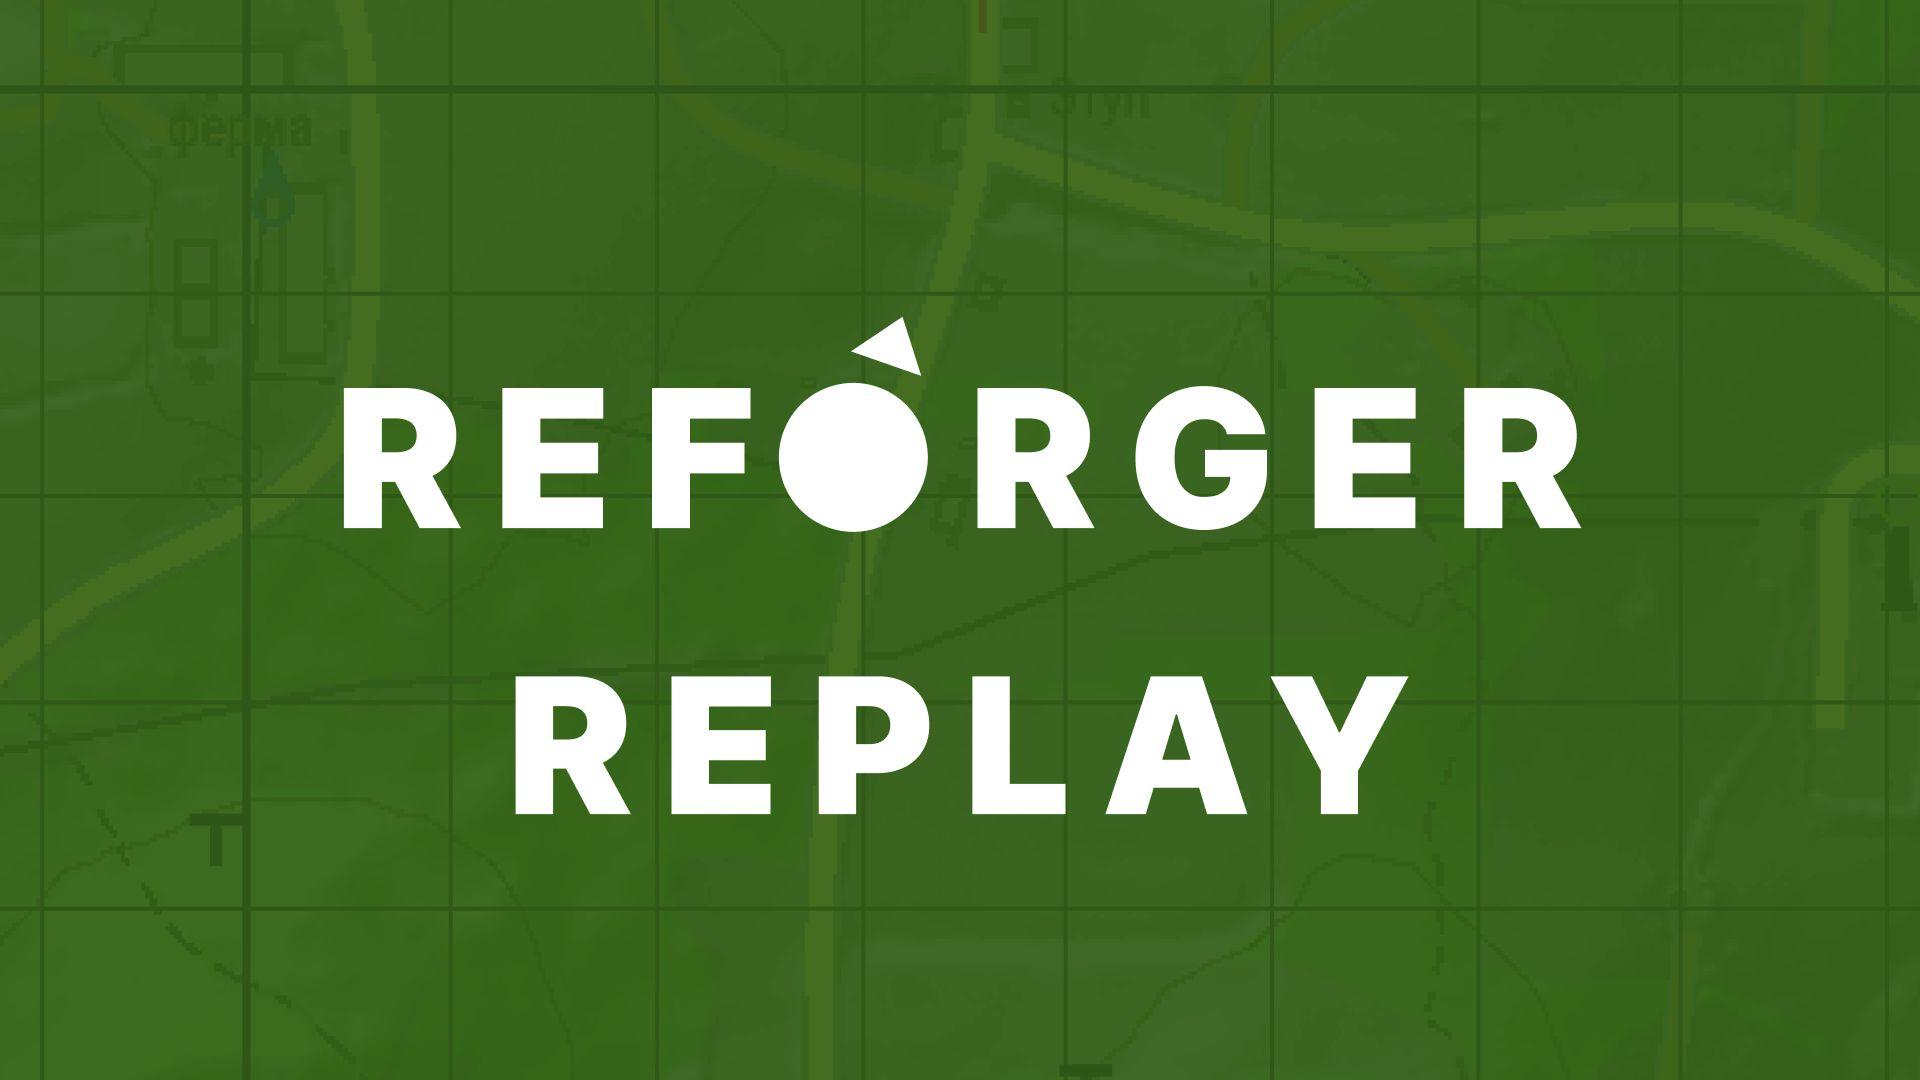 Reforger Replays